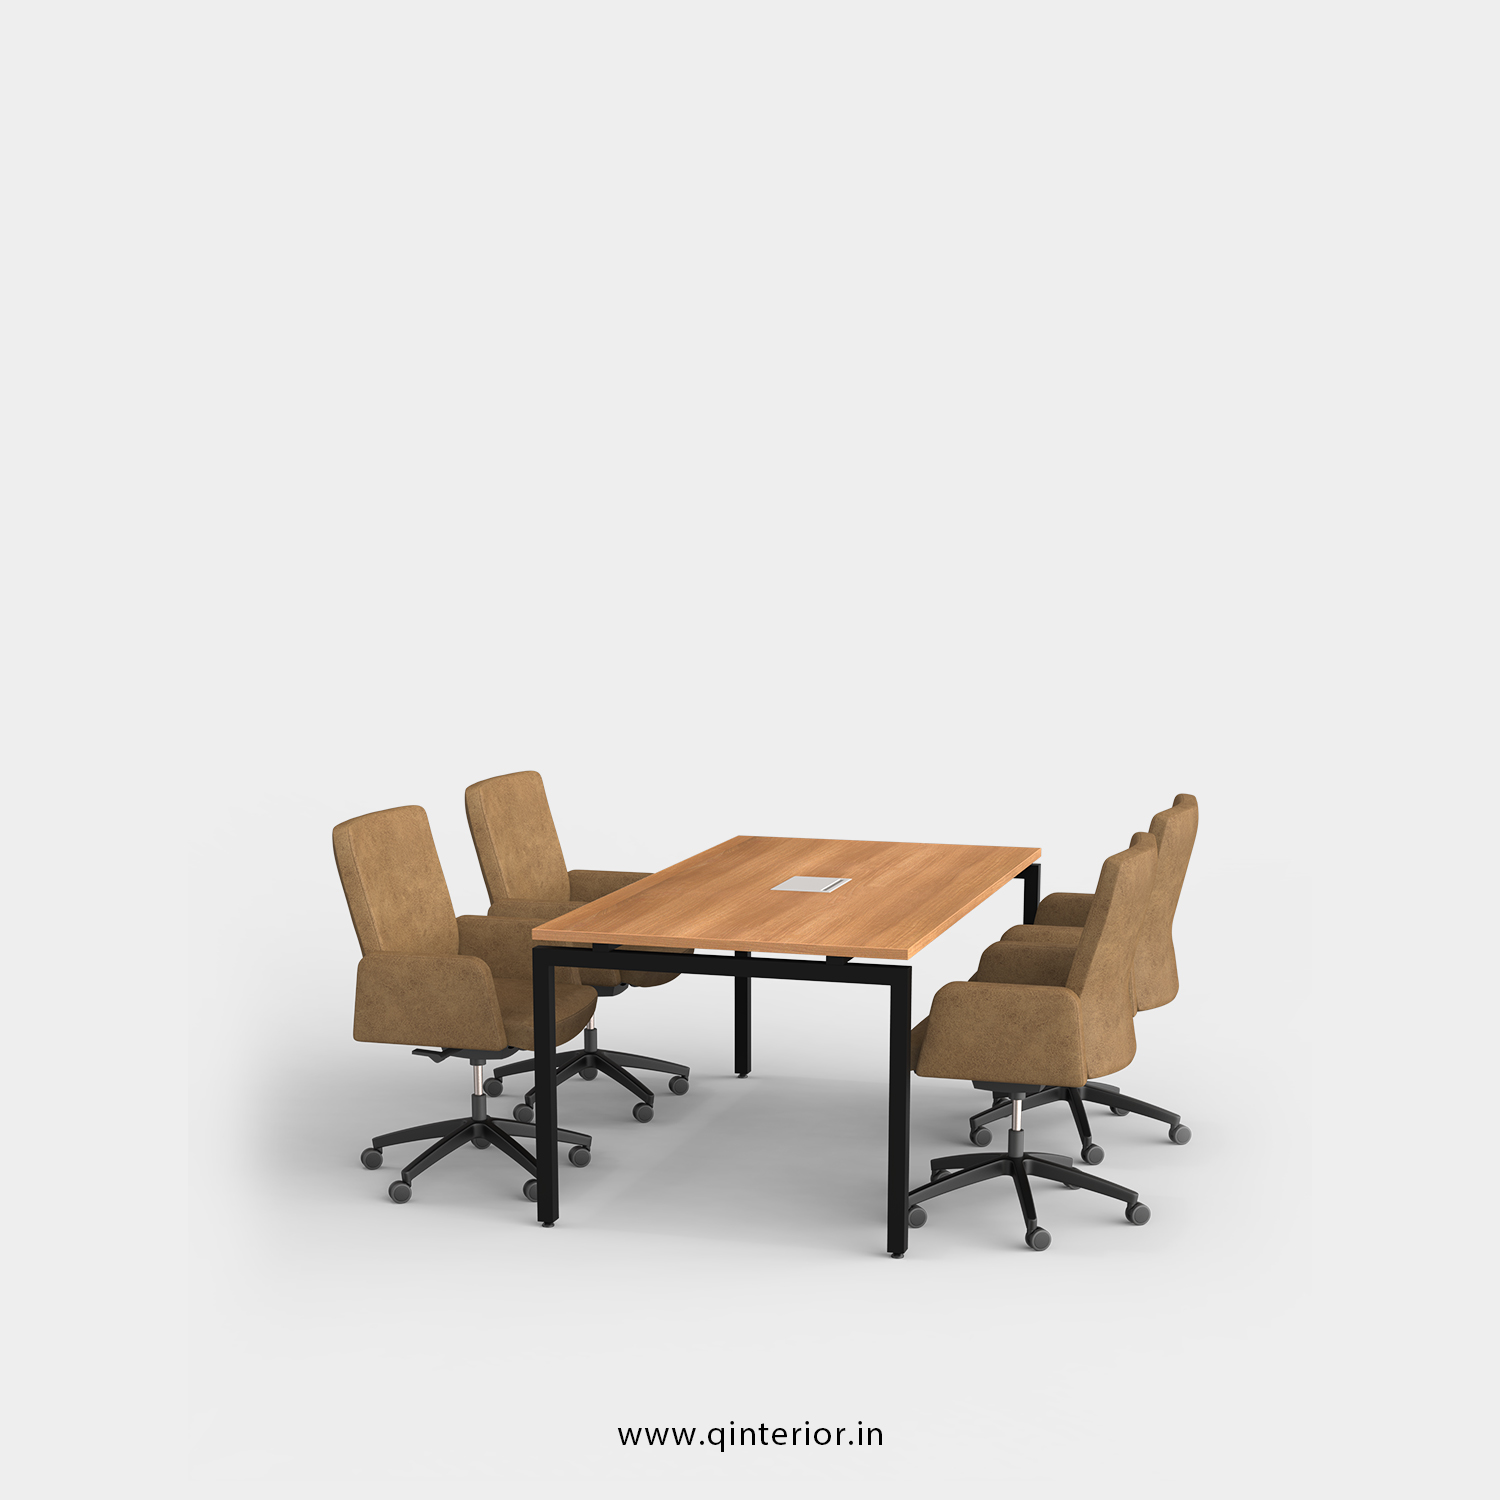 Montel Meeting Table in Oak Finish – OMT001 C2